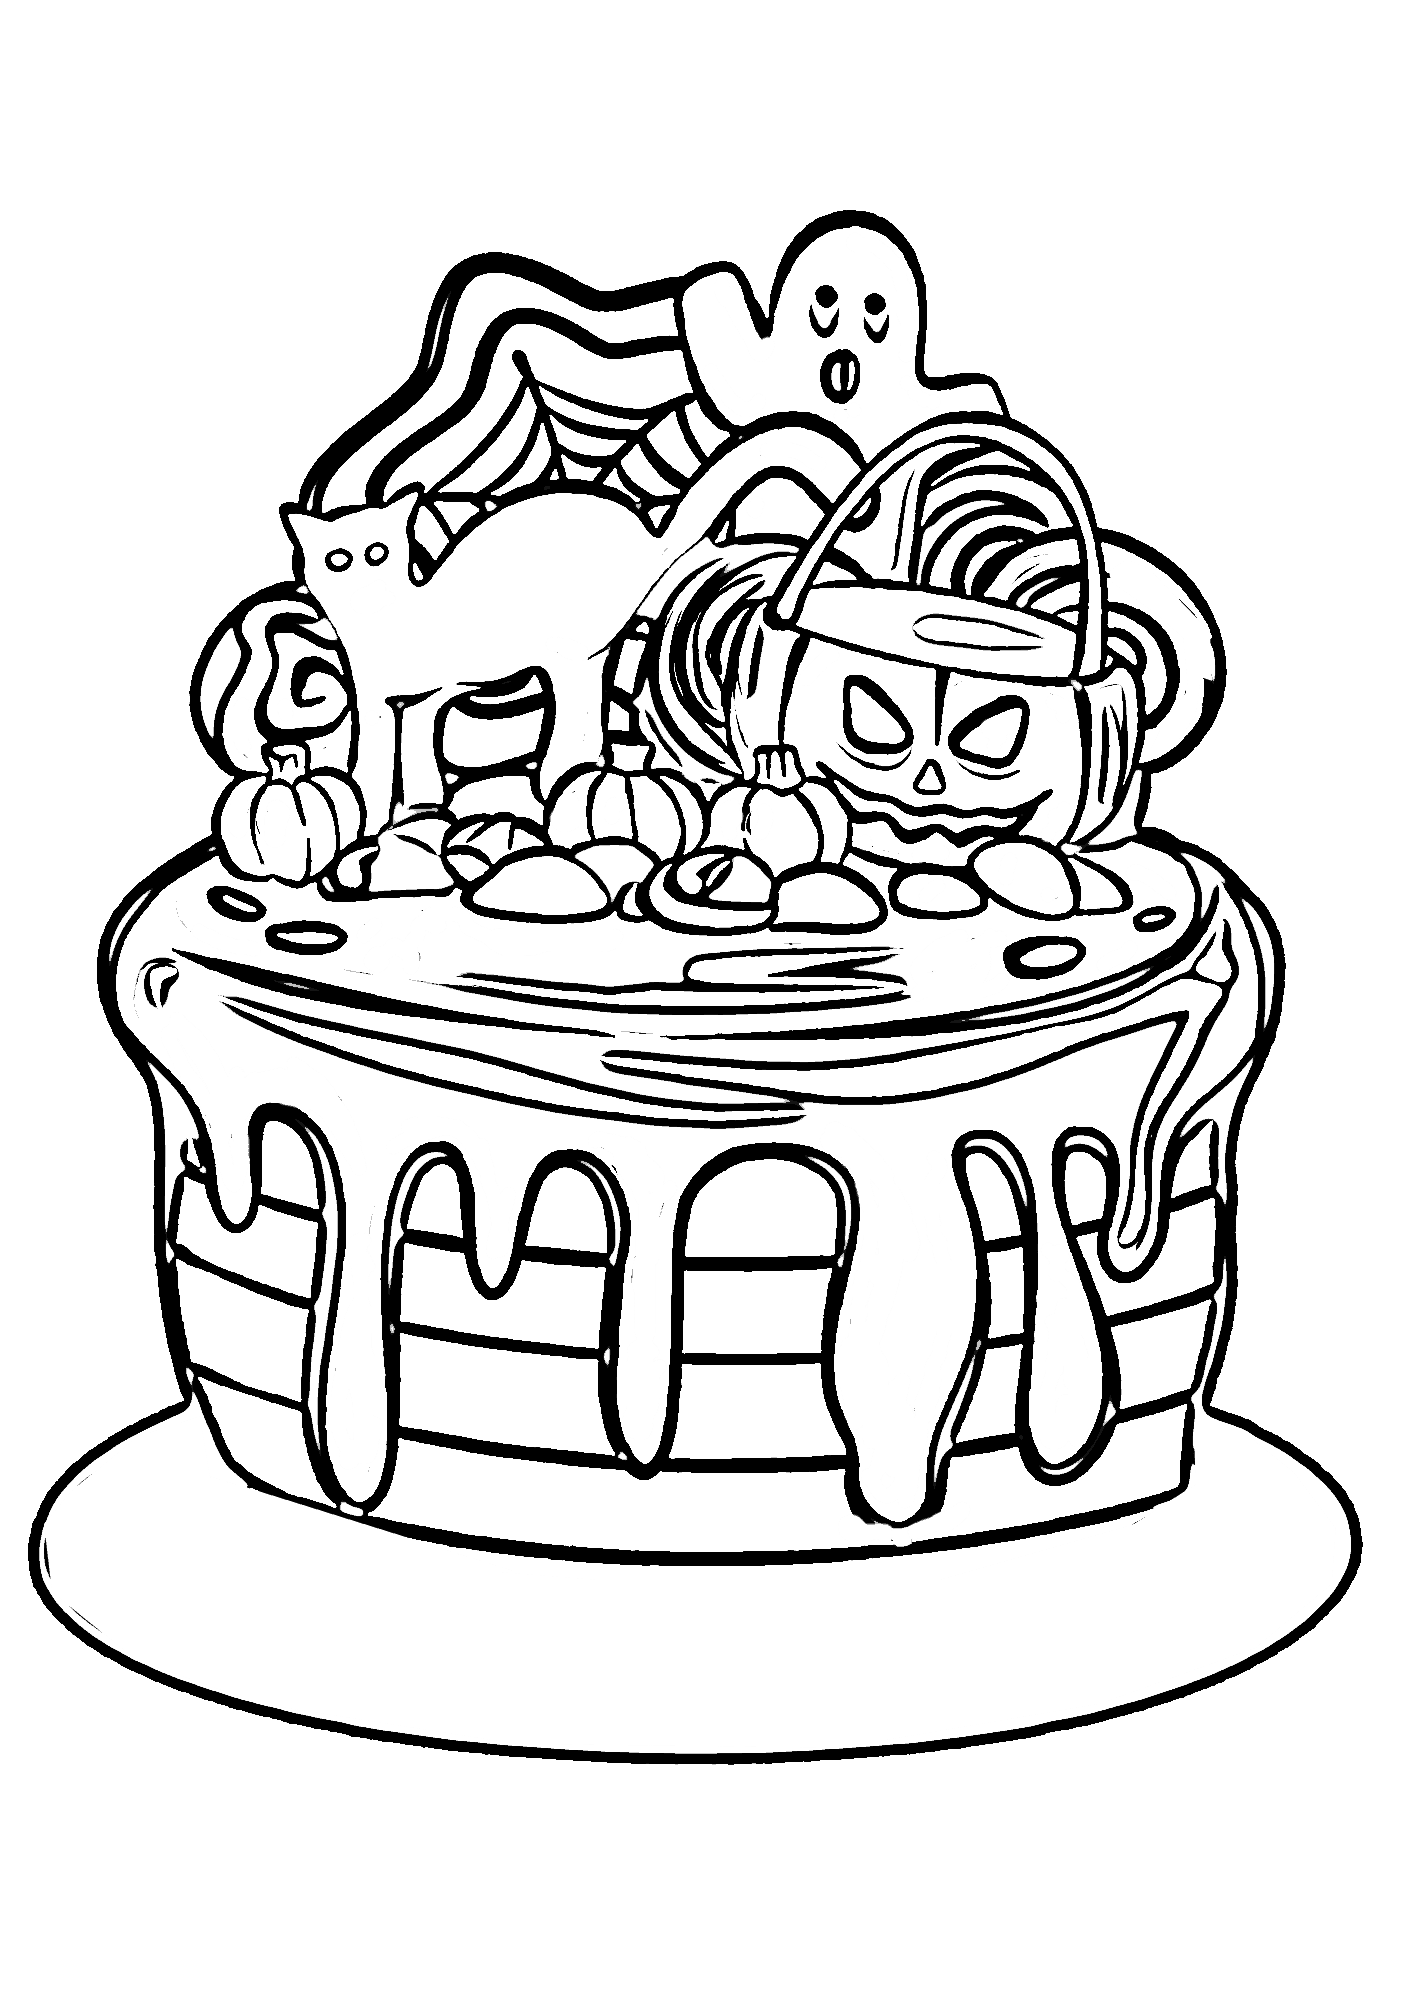 Halloween Party Cake Coloring Pages